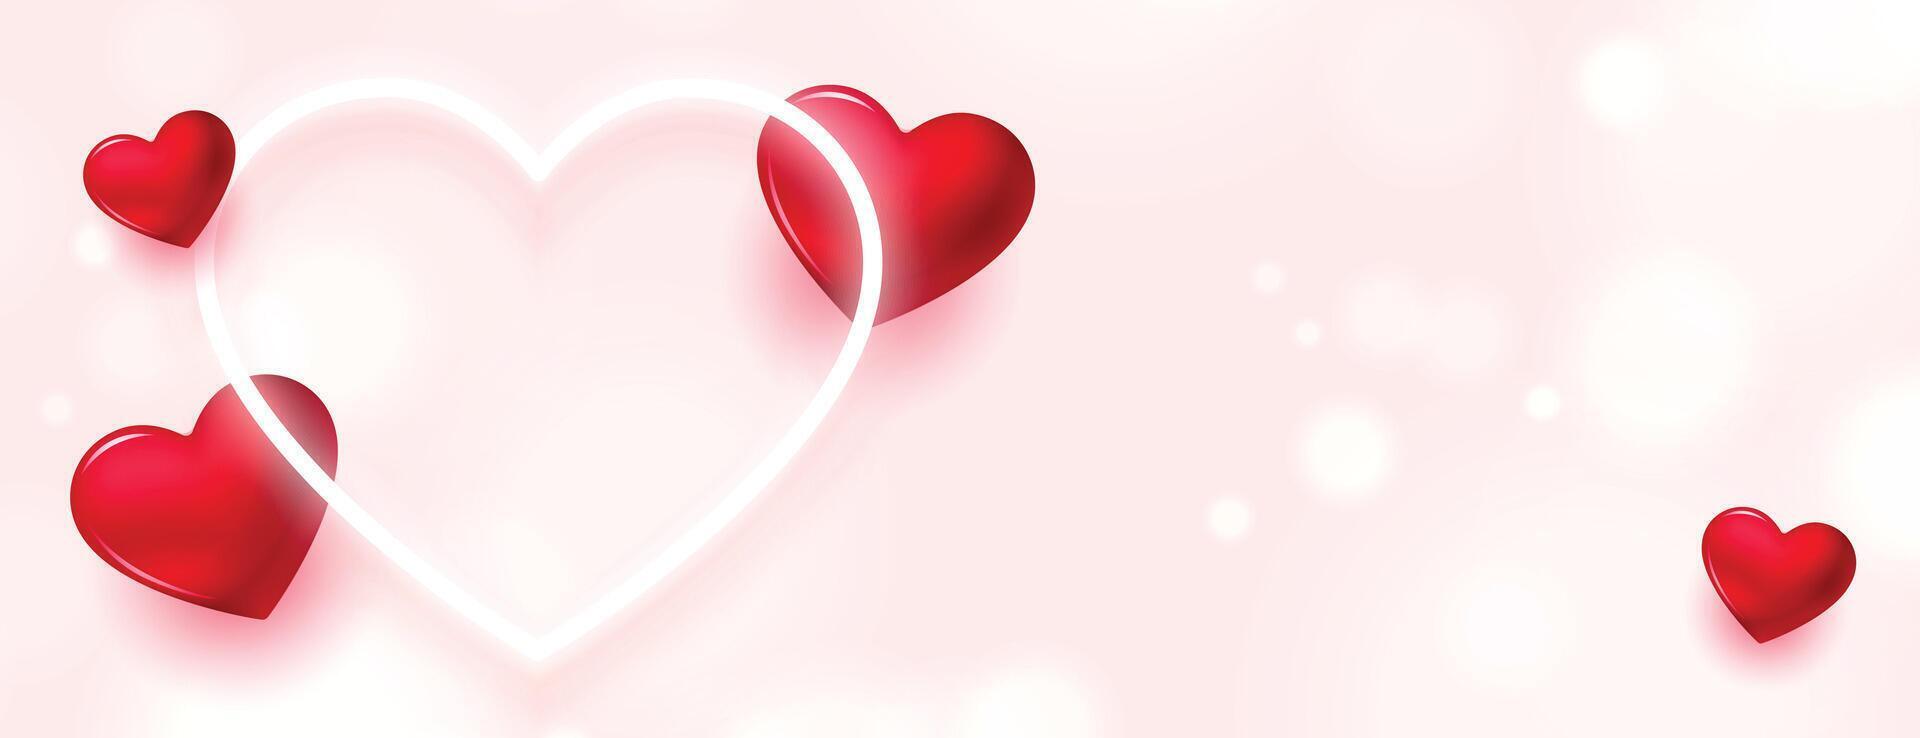 romantic valentines day hearts banner with neon love heart vector